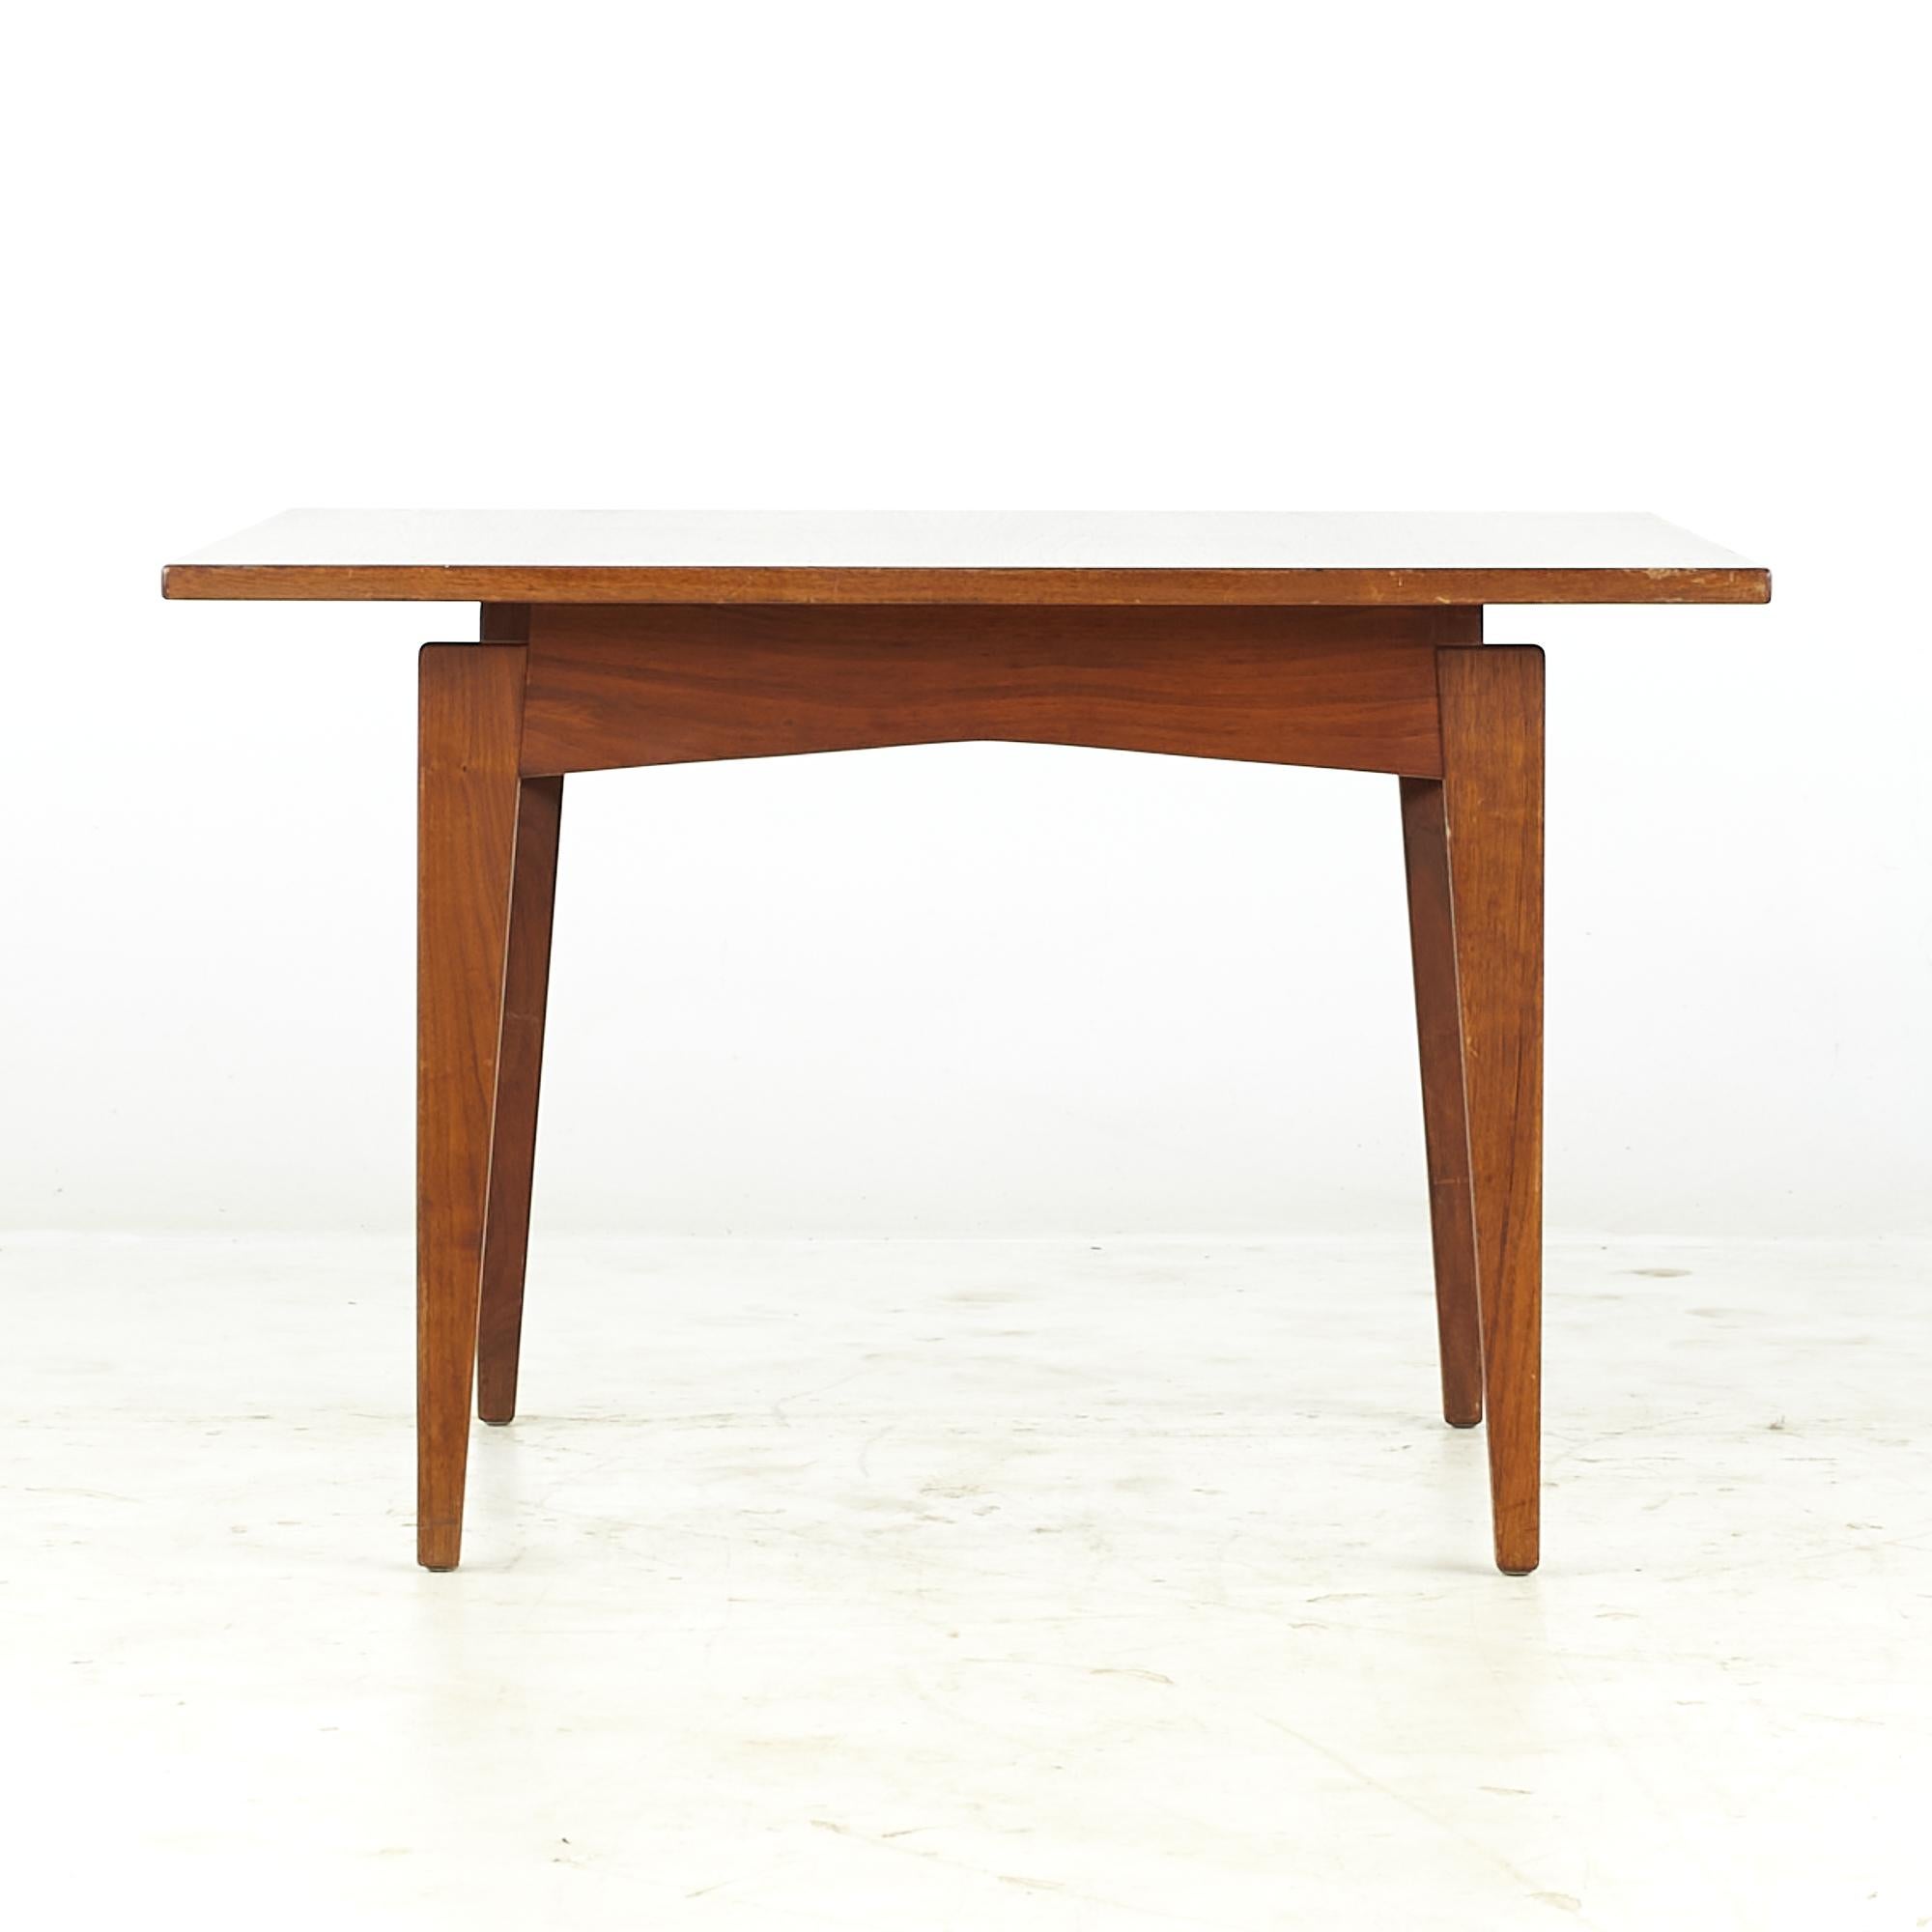 Jens Risom midcentury Walnut Side Coffee Table

This coffee table measures: 32 wide x 32 deep x 21 inches high

All pieces of furniture can be had in what we call restored vintage condition. That means the piece is restored upon purchase so it’s